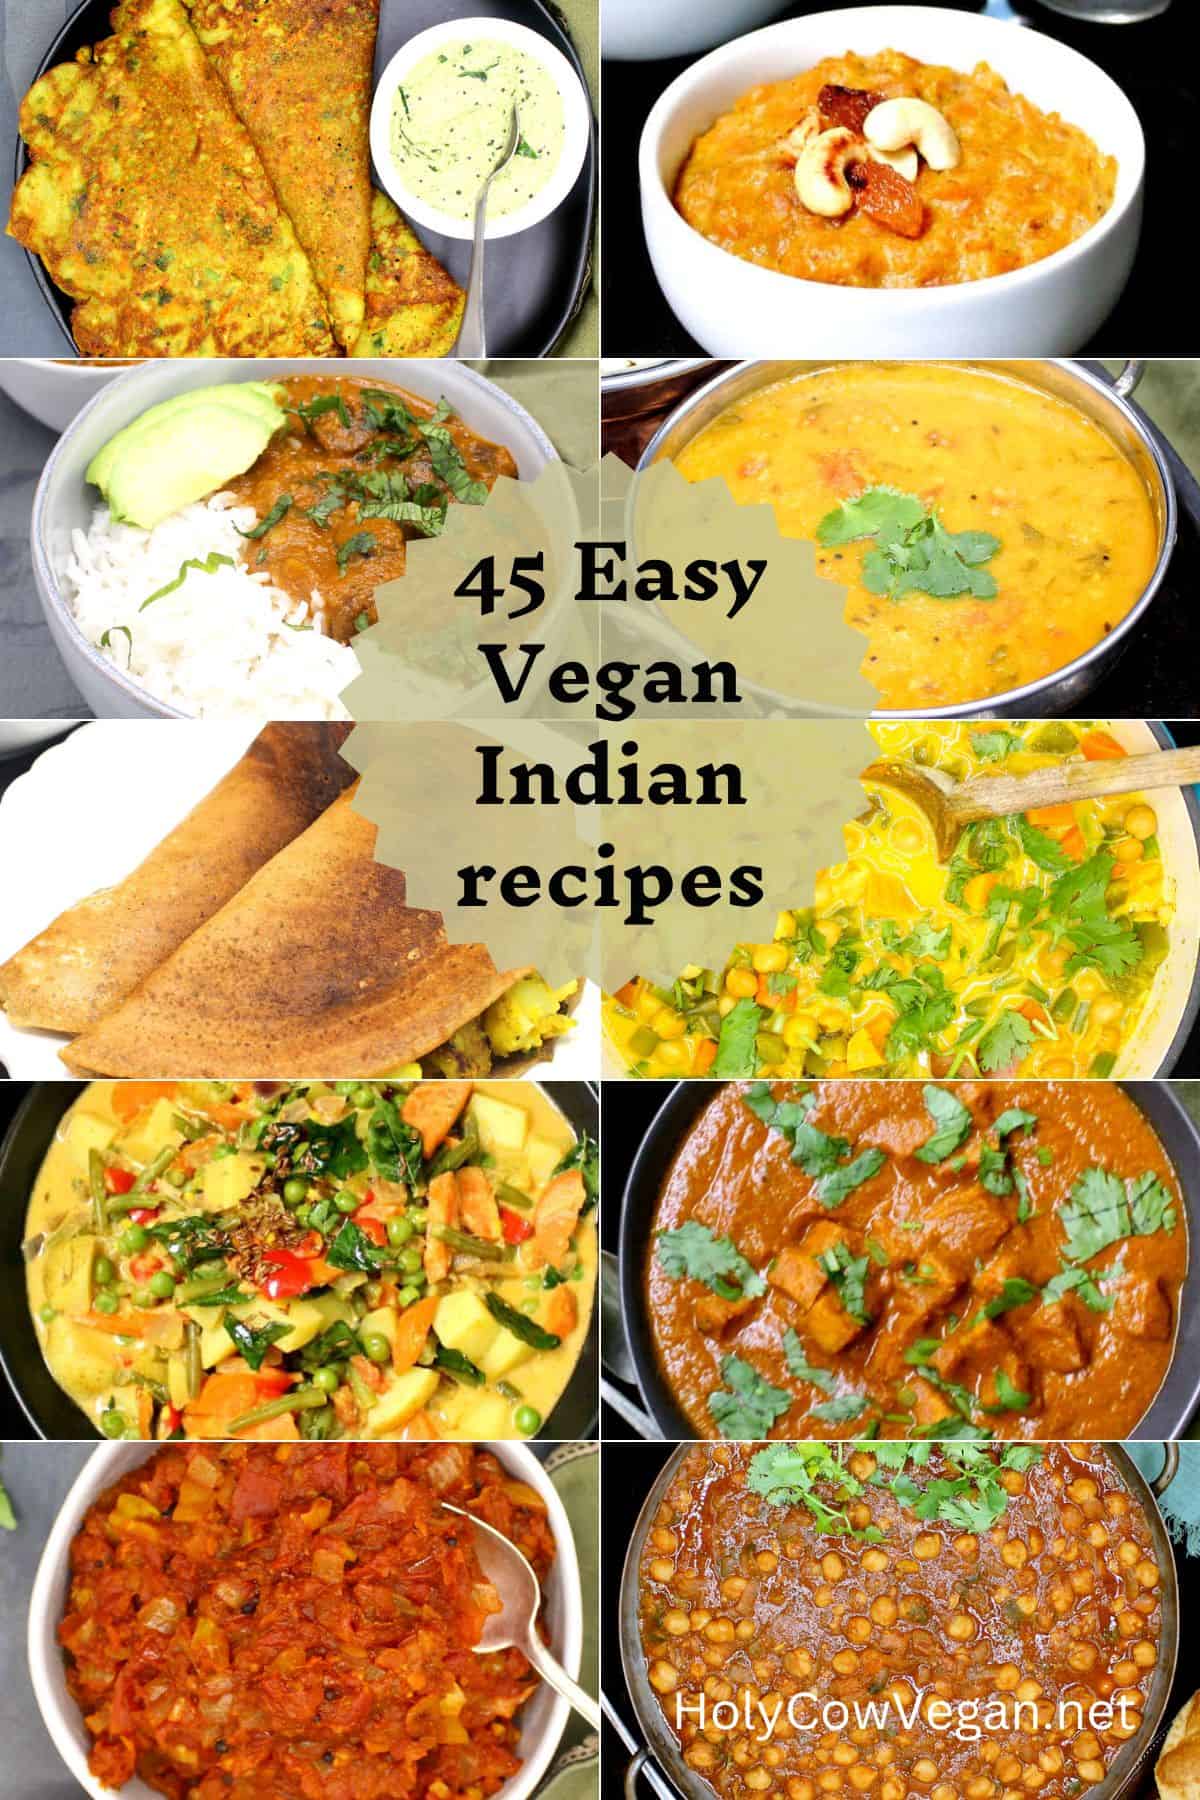 Images of 10 vegan Indian recipes with text that says "45 easy vegan Indian recipes."